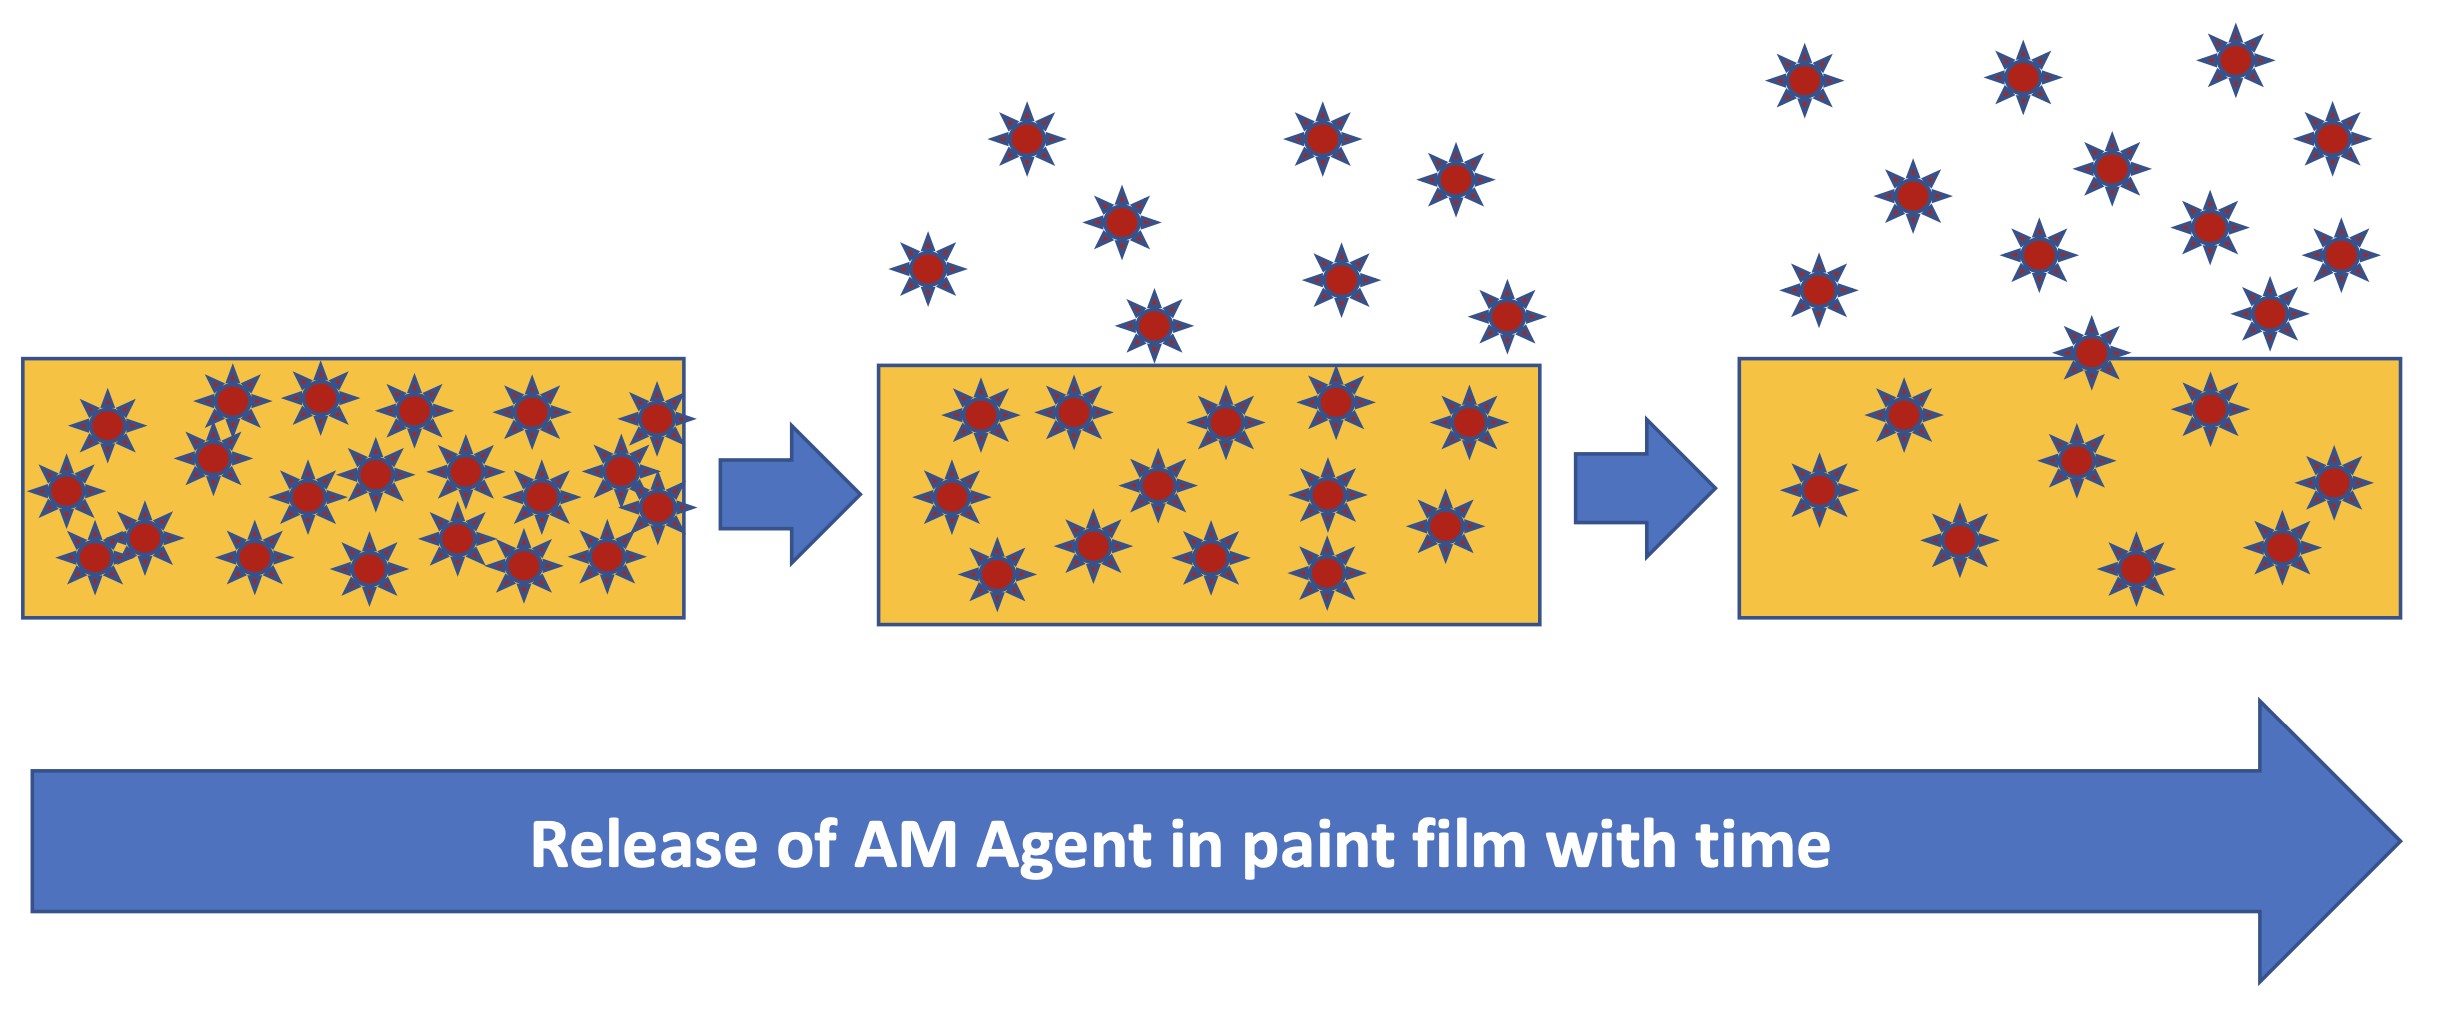 Release of AM Agent in paint film with time